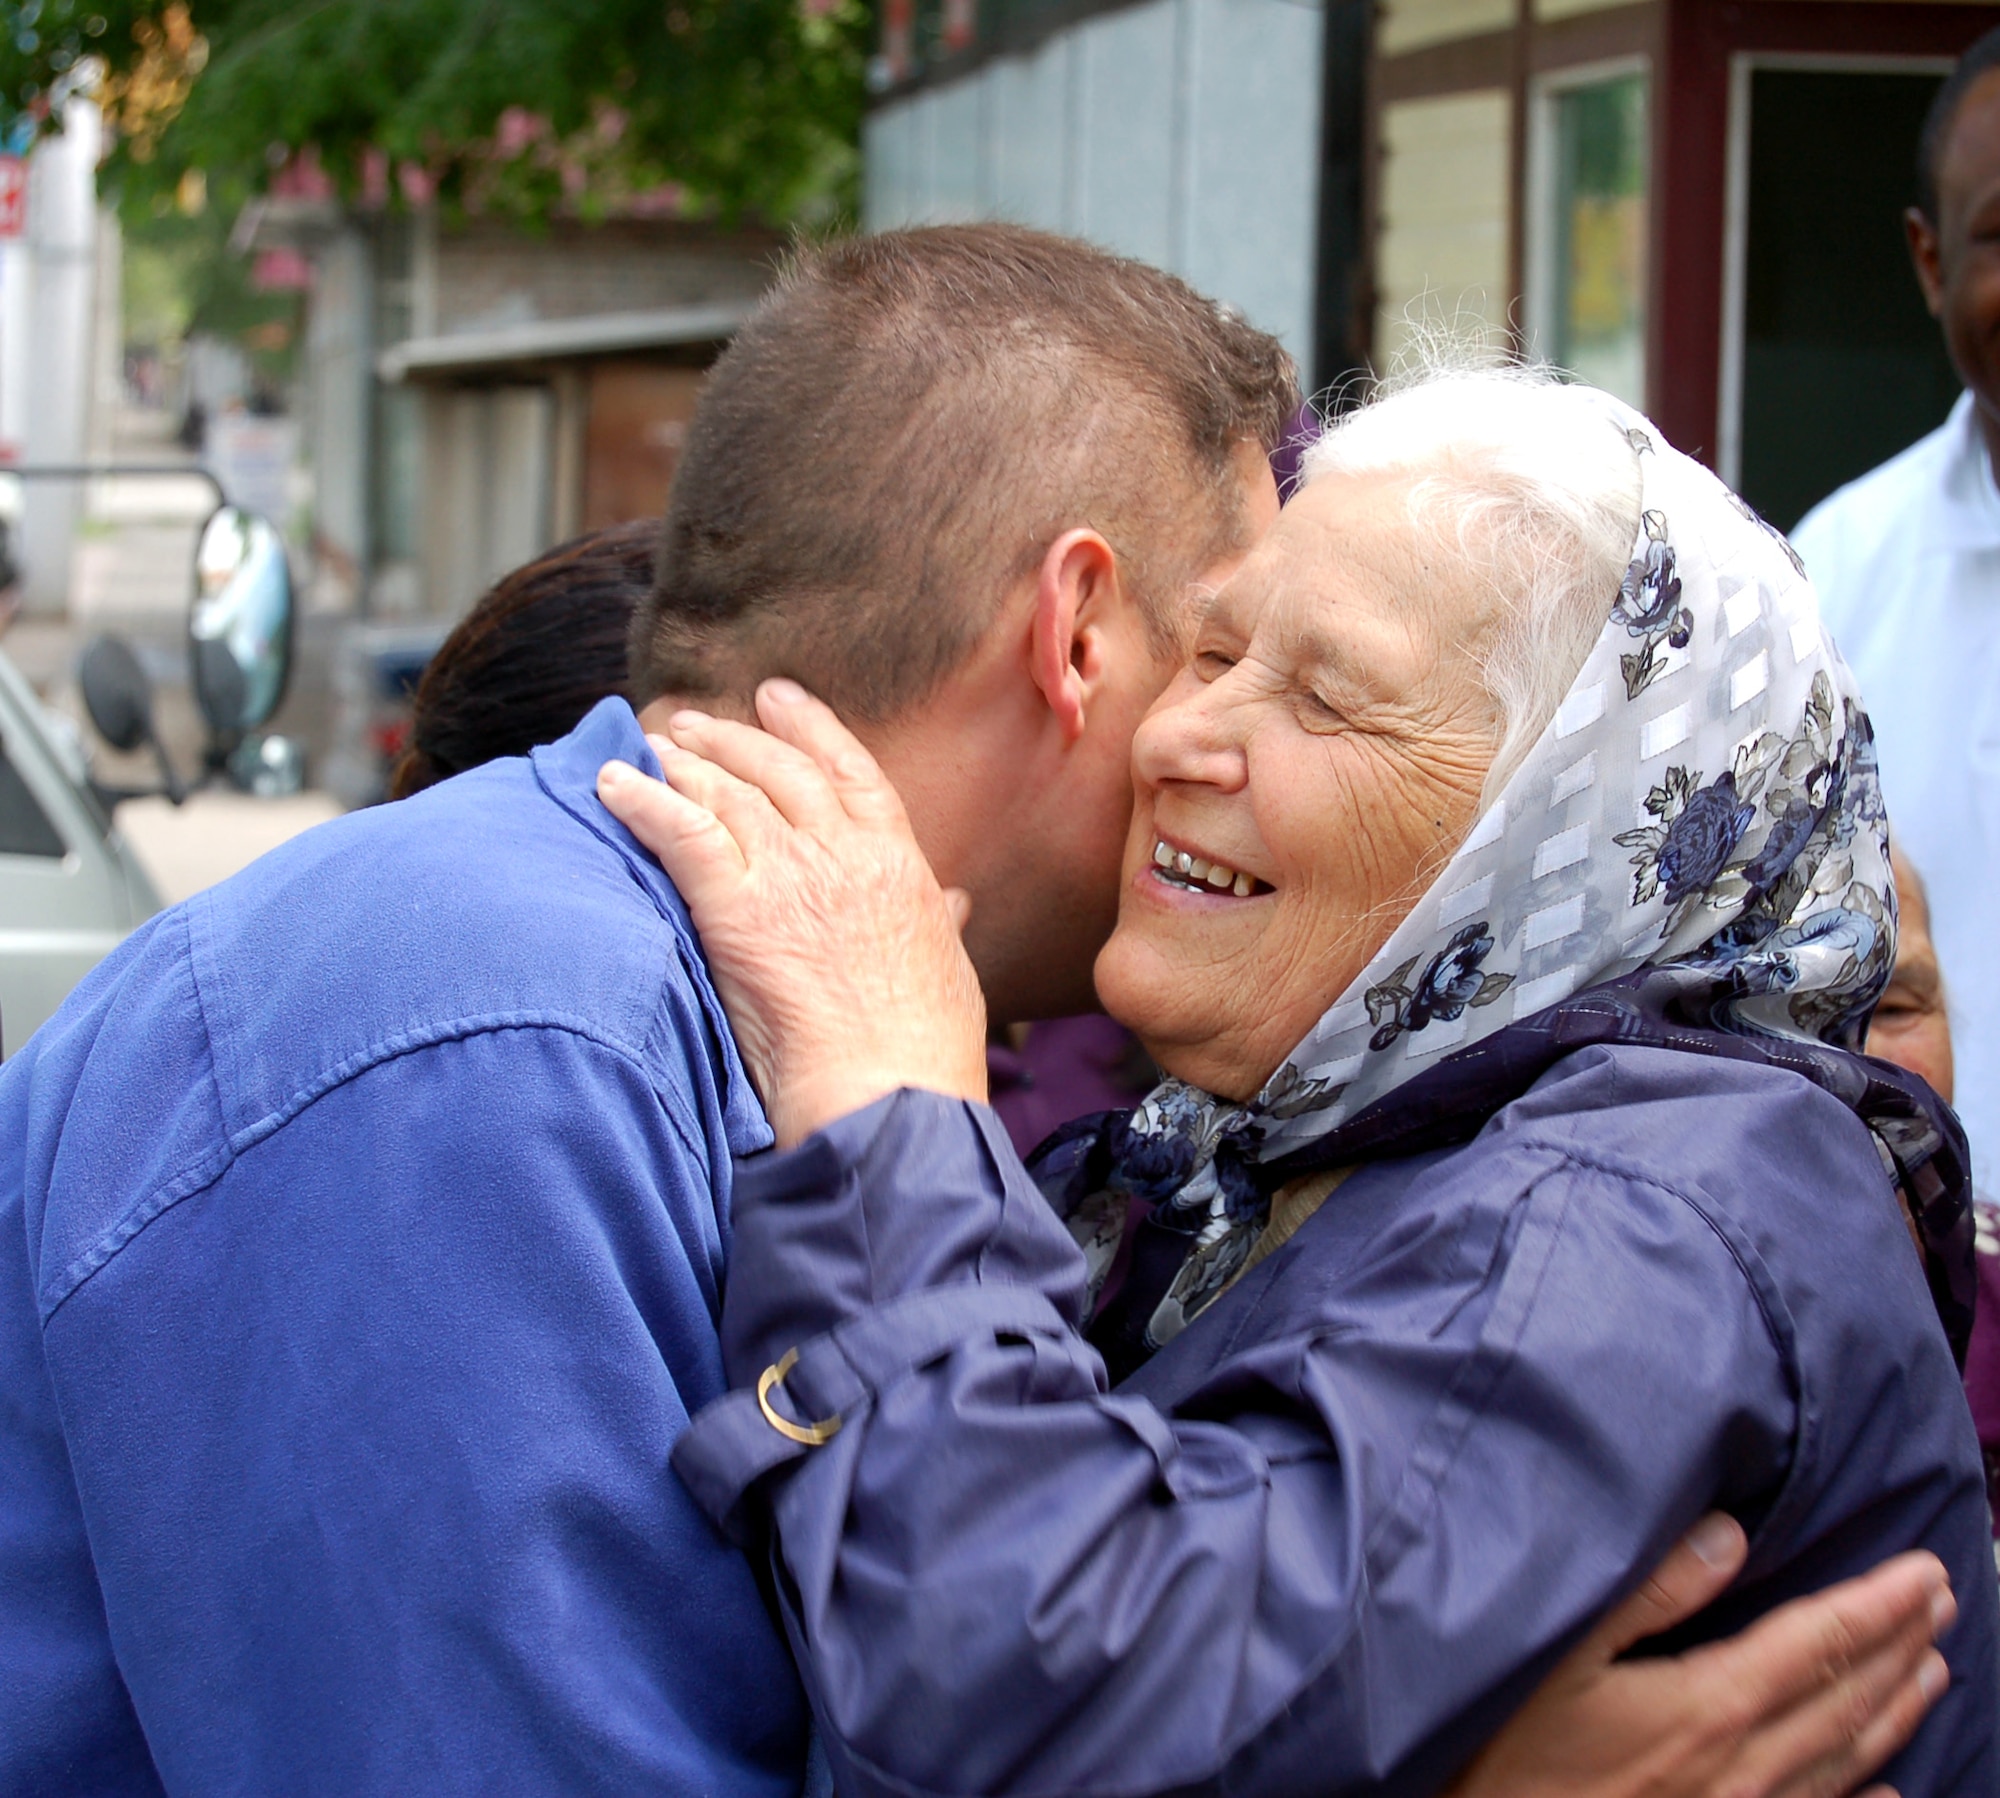 Olga hugs Capt. Arnold Sauve after a lunch outing in Bishkek, Kyrgyzstan, on Thursday, May 4, 2006. Airmen from nearby Manas Air Base sponsor 20 elderly women who receive aid from Babushka Adoption. The local non-governmental organization assists elderly people left vulnerable as this post-Soviet nation works to stabilize its economy. (U.S. Air Force photo/Staff Sgt. Lara Gale)